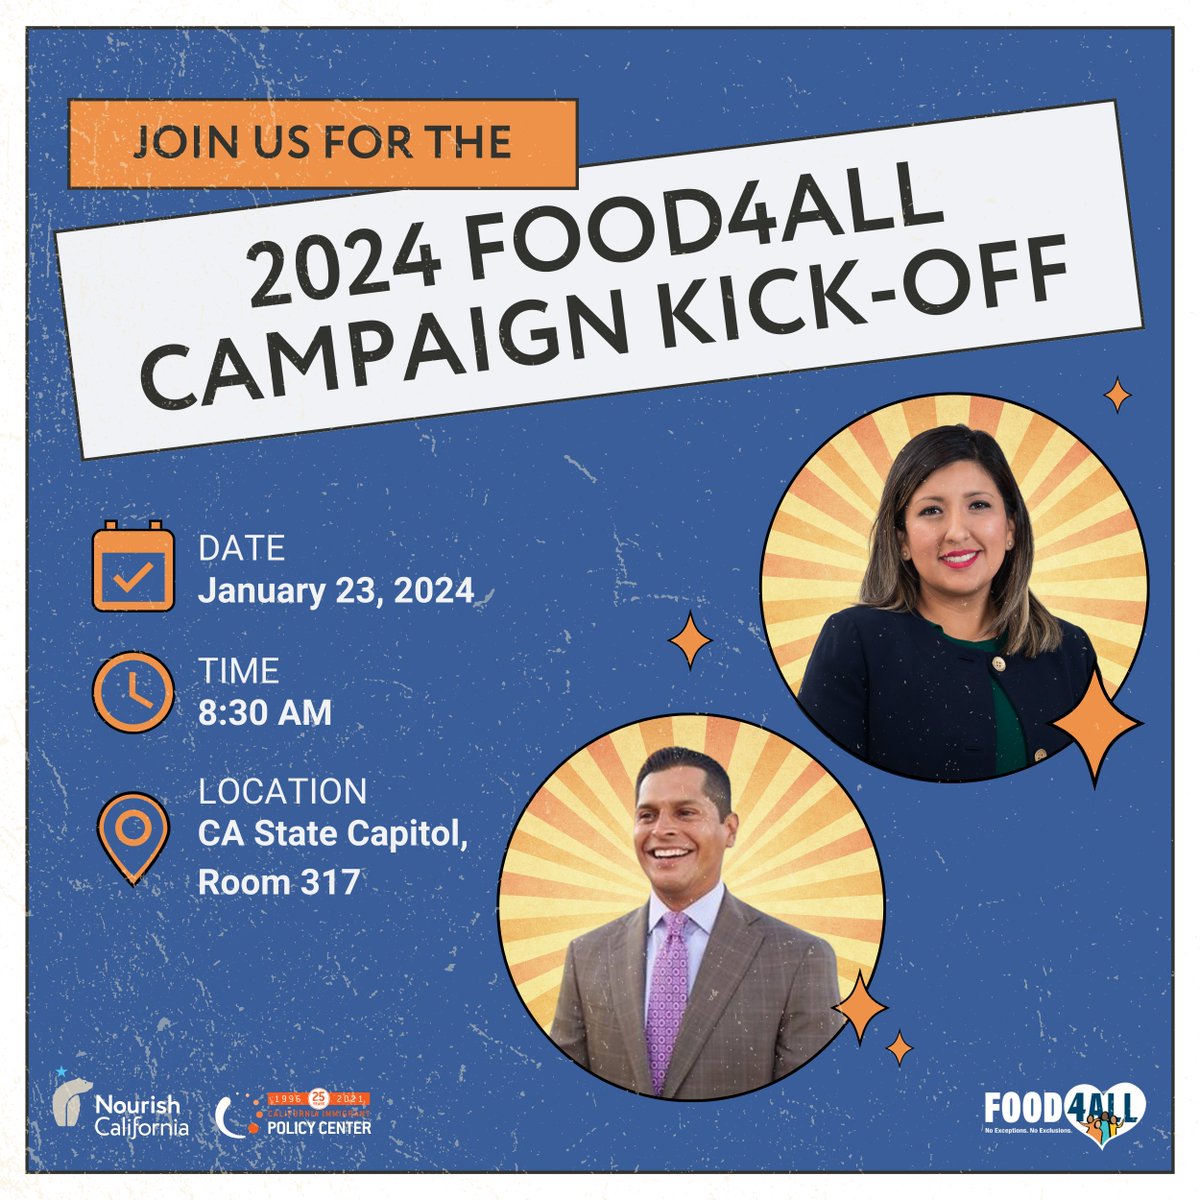 Today is the #Food4All campaign kick-off at the State CA State Capitol! @senator_hurtado and @msantiagoad54 will speak on the need to expand access to CalFresh for all. You can also watch @CALimmigrant's livestream on FB or @Nourish_CA's Instagram livestream, both at 11:30EST!